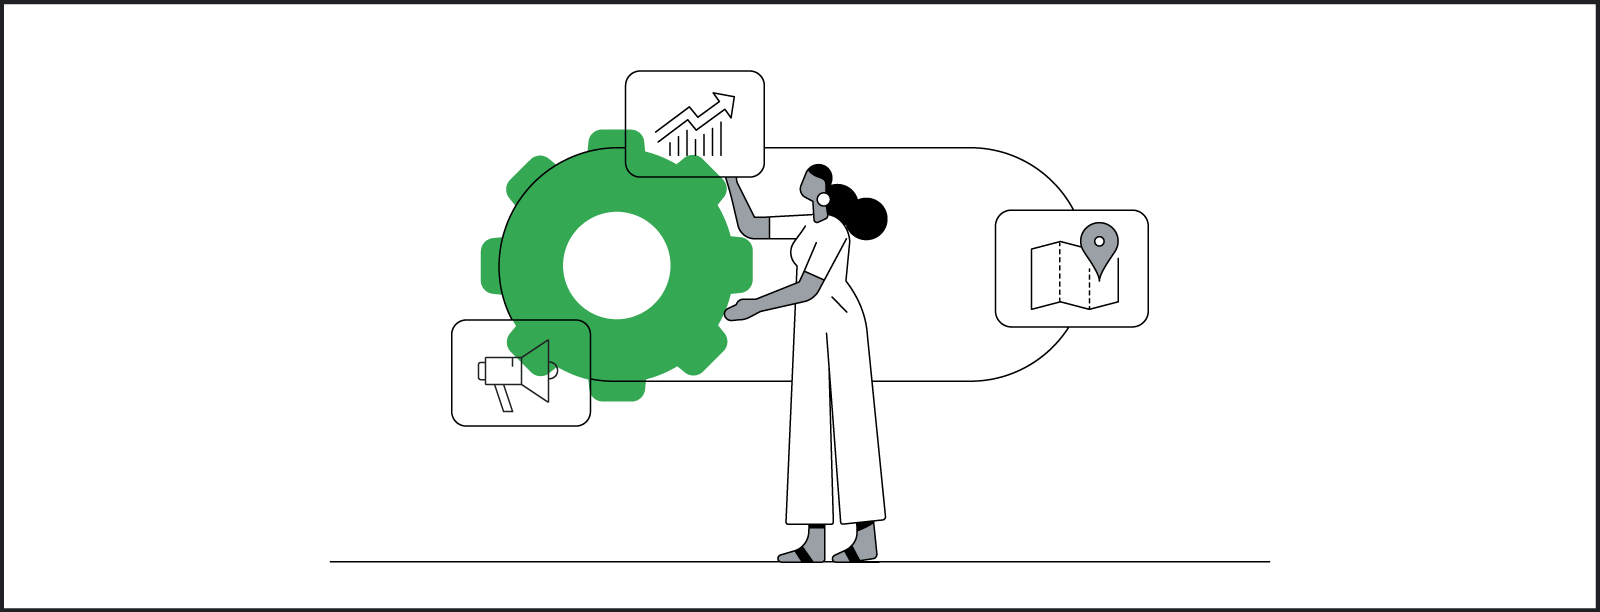 In a stylized illustration, a Black woman interacts with a stylized array of demand settings, like amplification, location, growth, and search.